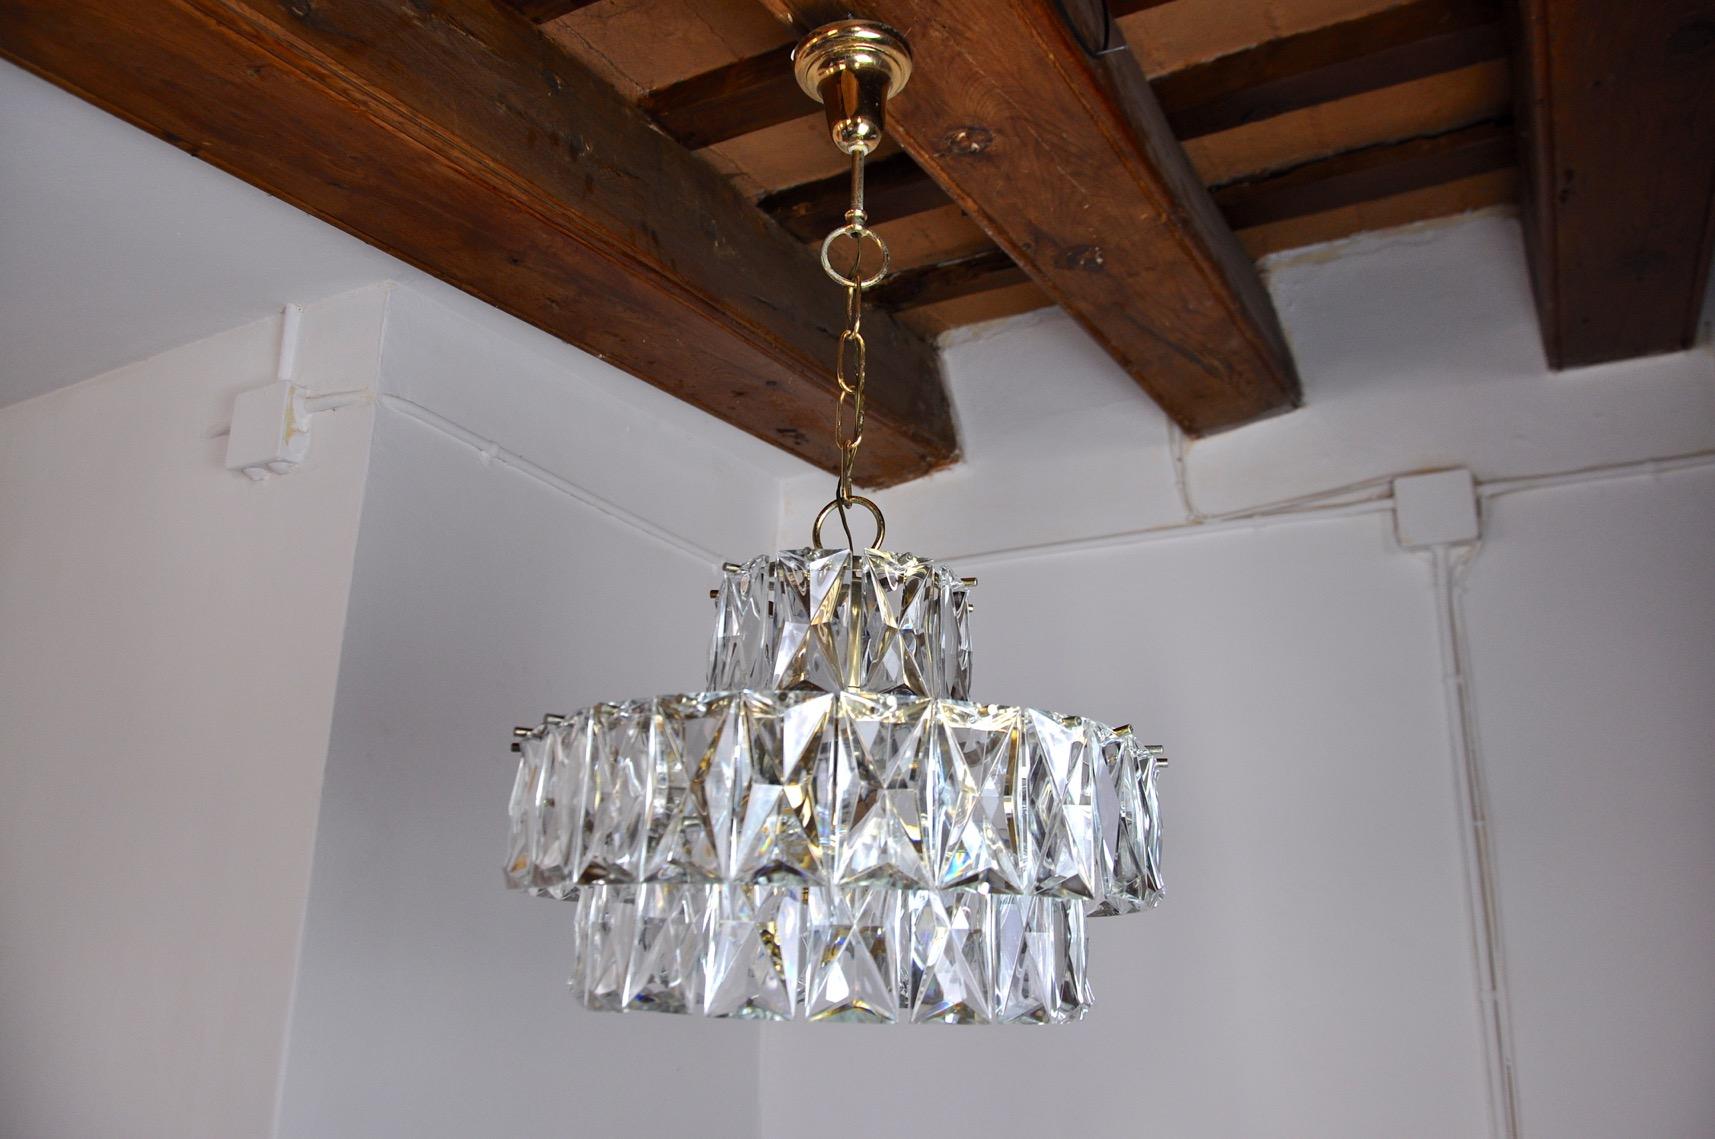 Rare and large kinkeldey chandelier designed and produced in Germany in the 70s. Structure in gilded metal made up of cut crystals distributed on 3 stages. Rare design object that will illuminate your interior wonderfully. Electricity verified,